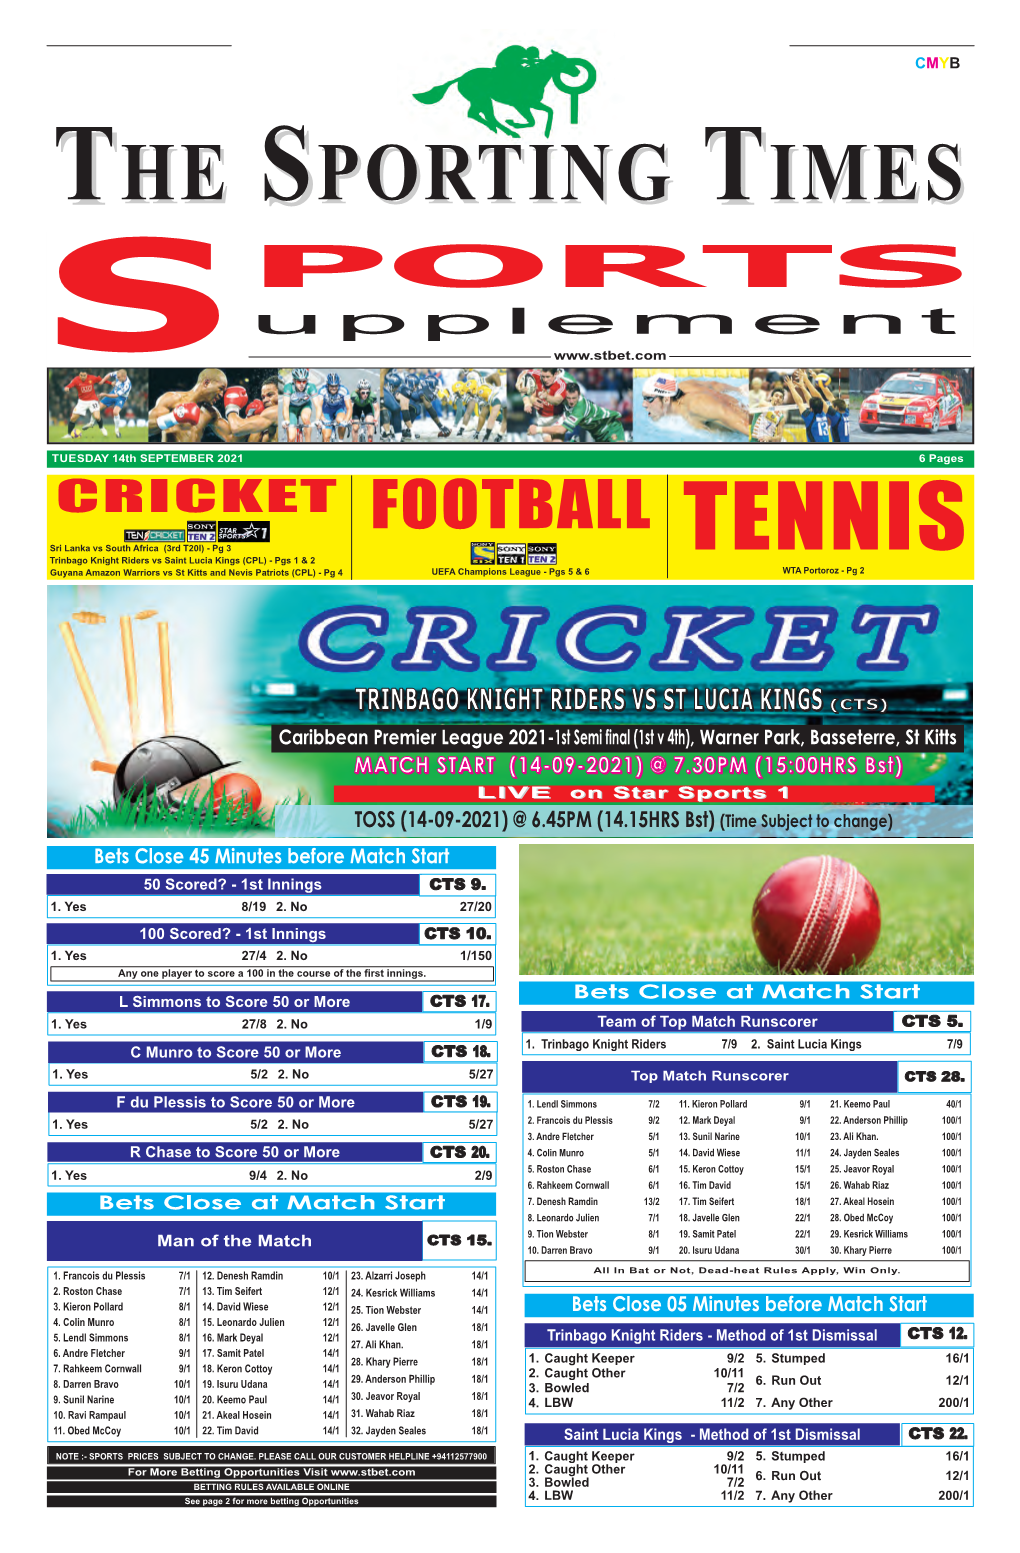 THE SPORTING TIMES SPORTS SUPPLEMENT, Tuesday 14Th September 2021